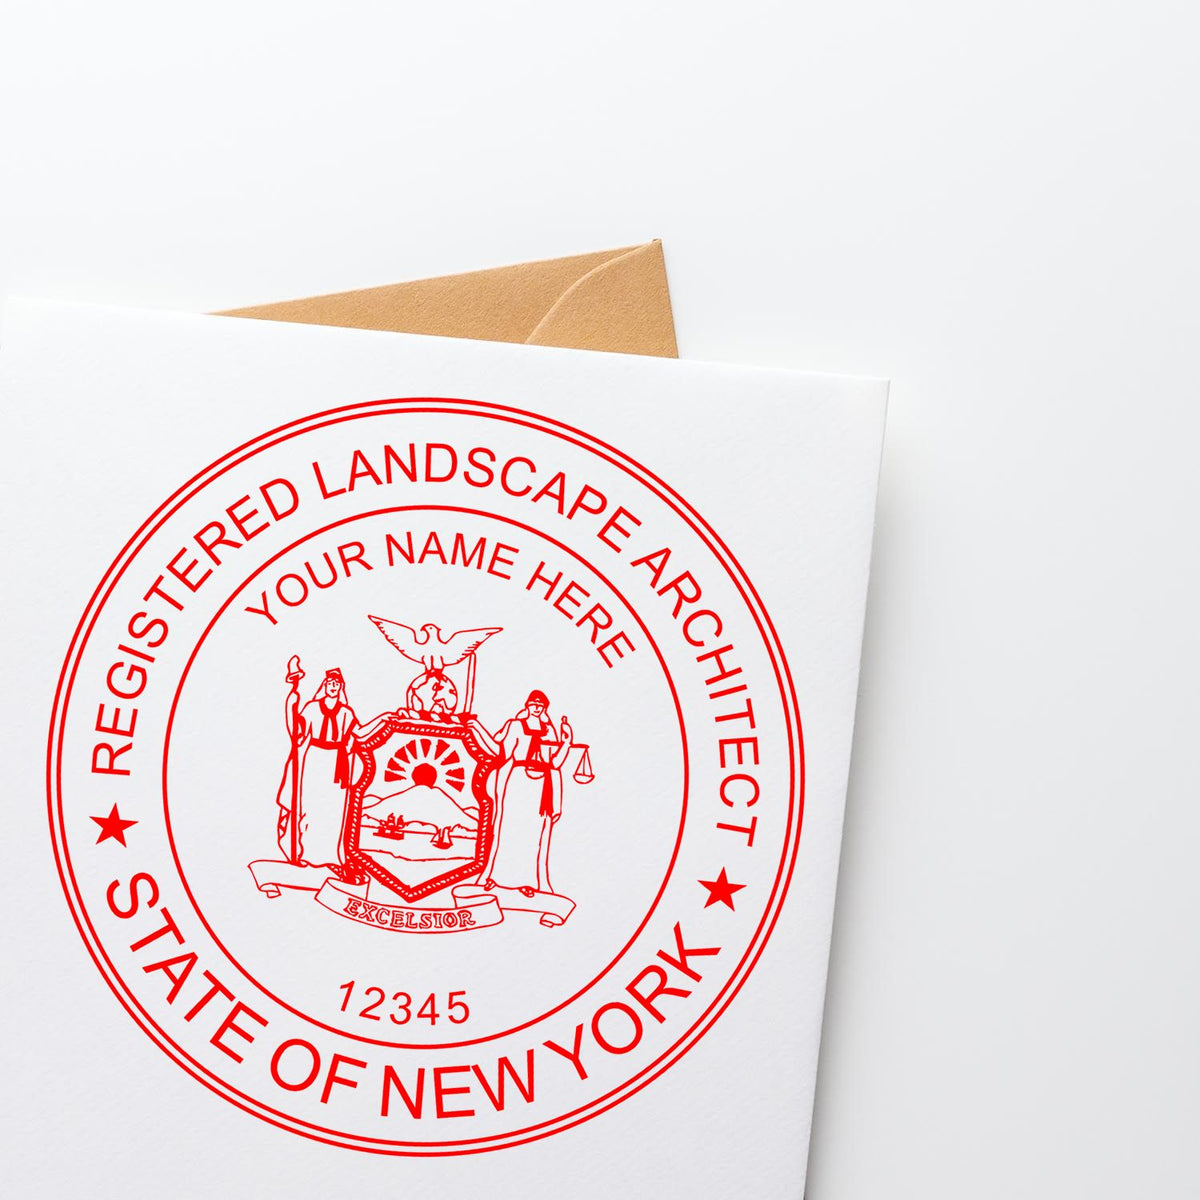 A stamped impression of the Self-Inking New York Landscape Architect Stamp in this stylish lifestyle photo, setting the tone for a unique and personalized product.